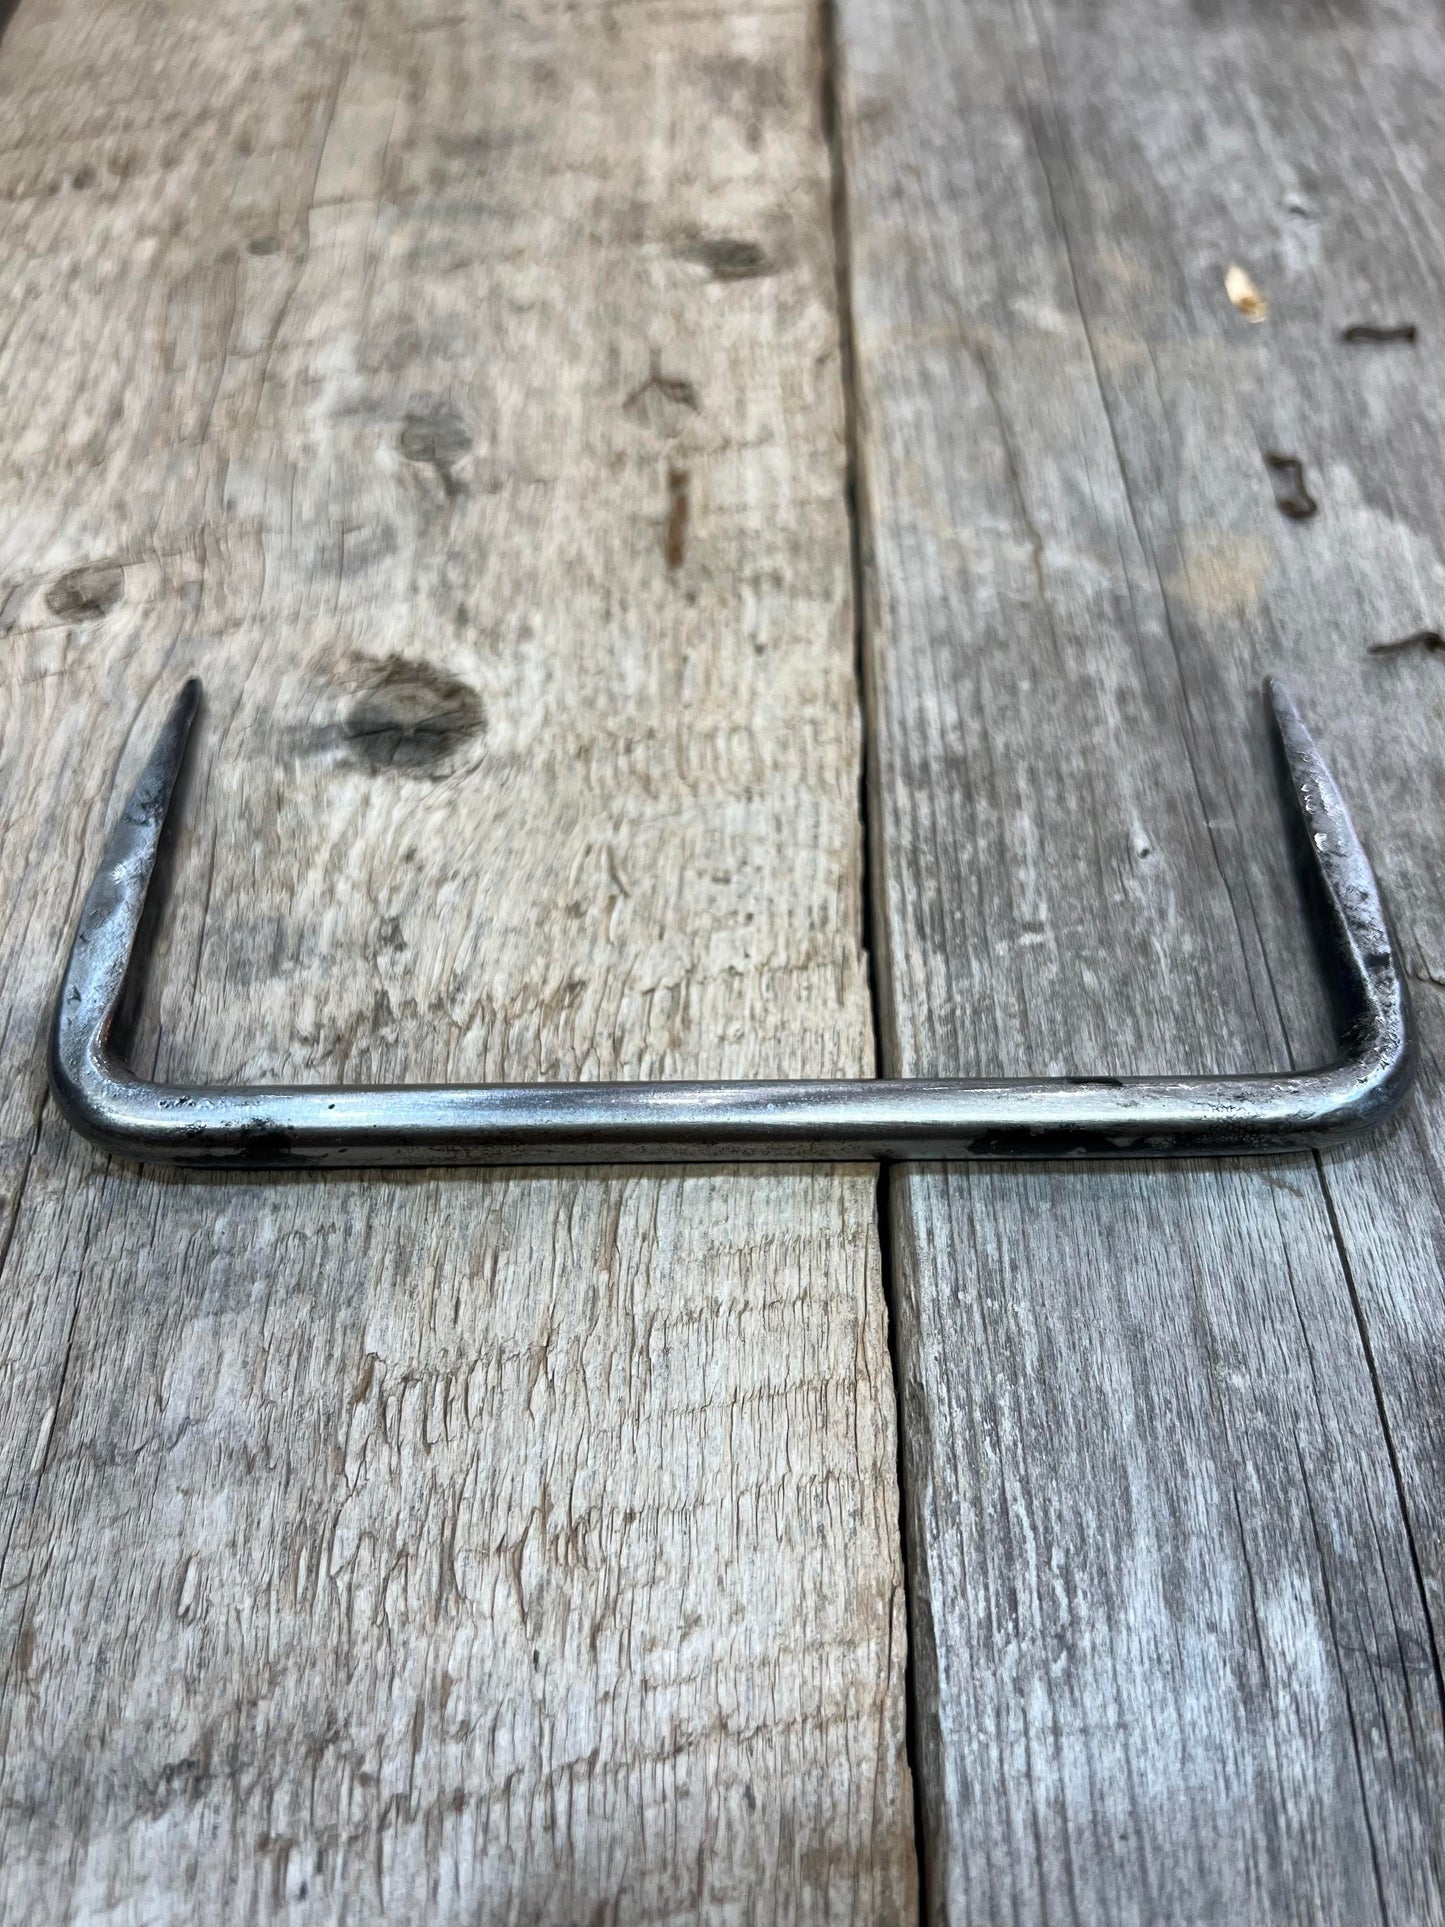 HANDLE-WROUGHT IRON--GREAT FOR CHARCUTERIE BOARDS OR TRAYS